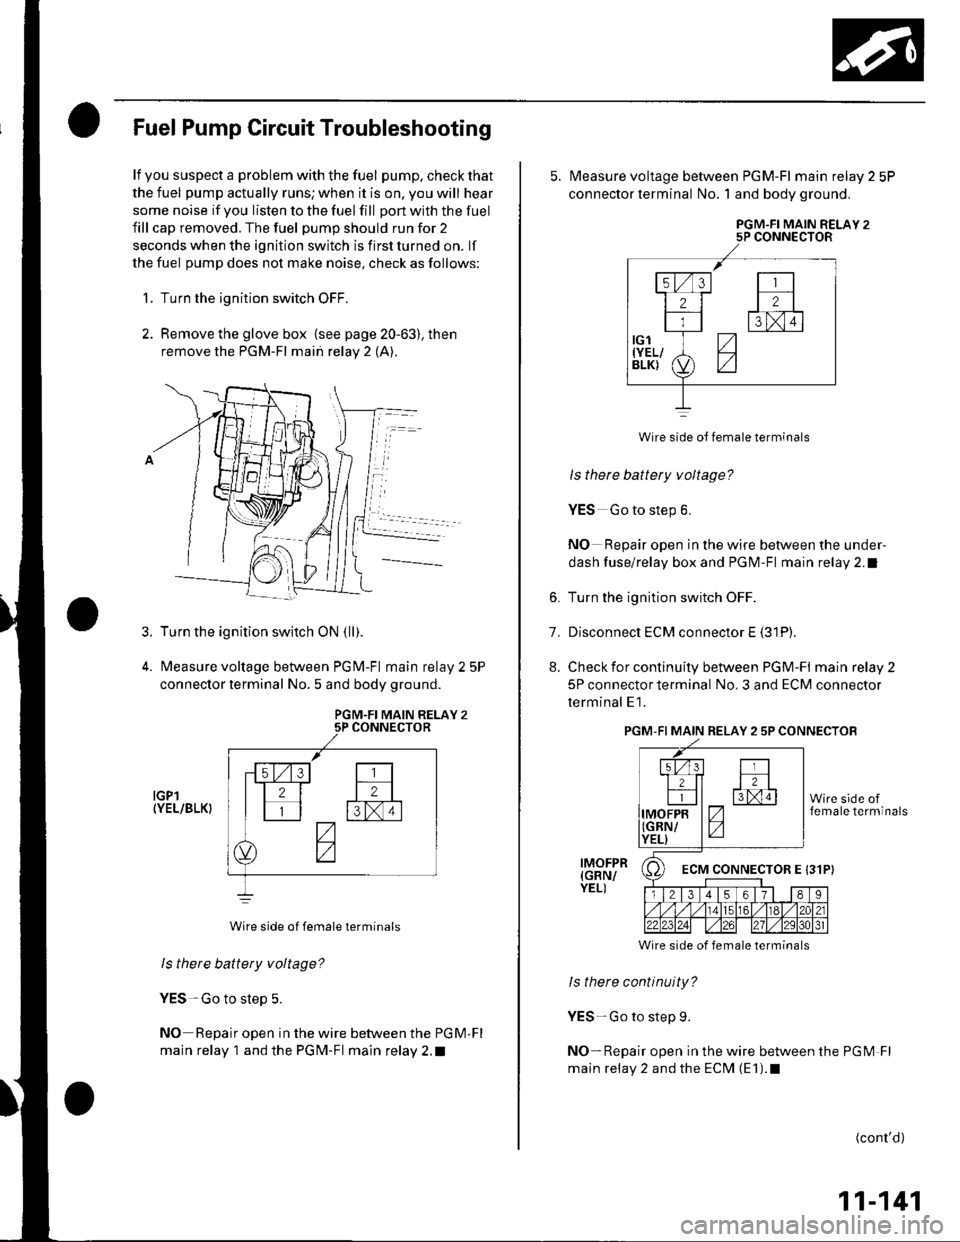 HONDA CIVIC 2002 7.G Service Manual Fuel Pump Circuit Troubleshooting
lf you suspect a problem with the fuel pump, check that
the fuel pump actually runs; when it is on, you will hear
some noise if you listen to the fuel fill port with 